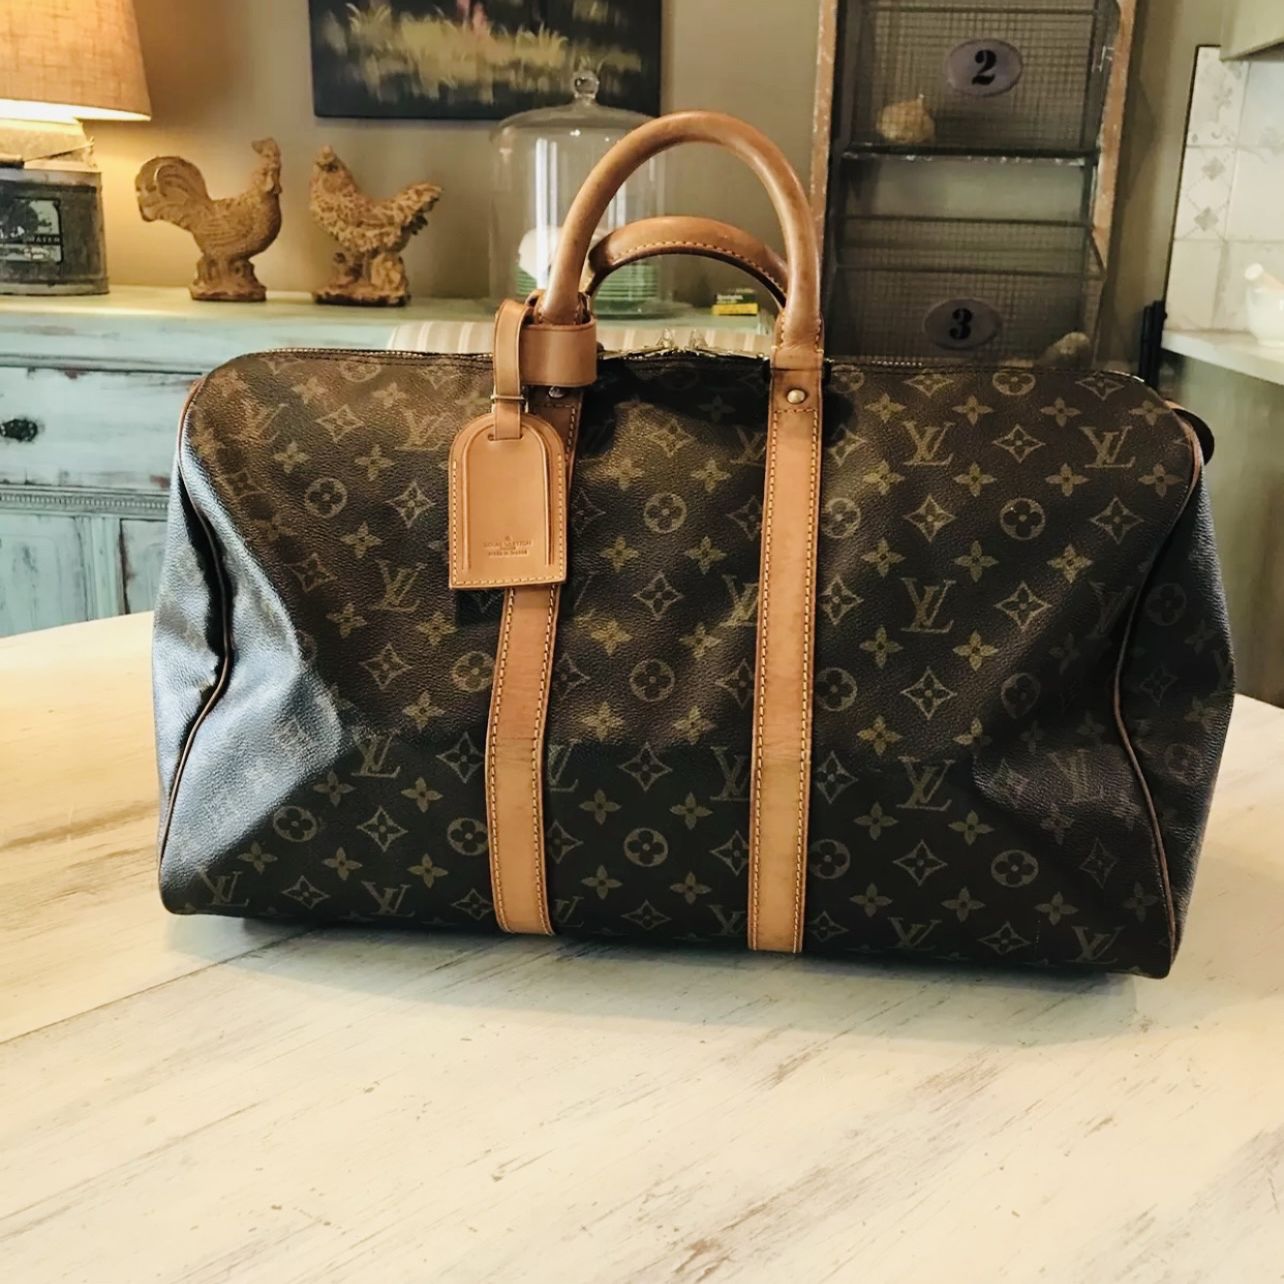 Louis Vuitton Monogram Eclipse Keepall 45 for Sale in Milpitas, CA - OfferUp